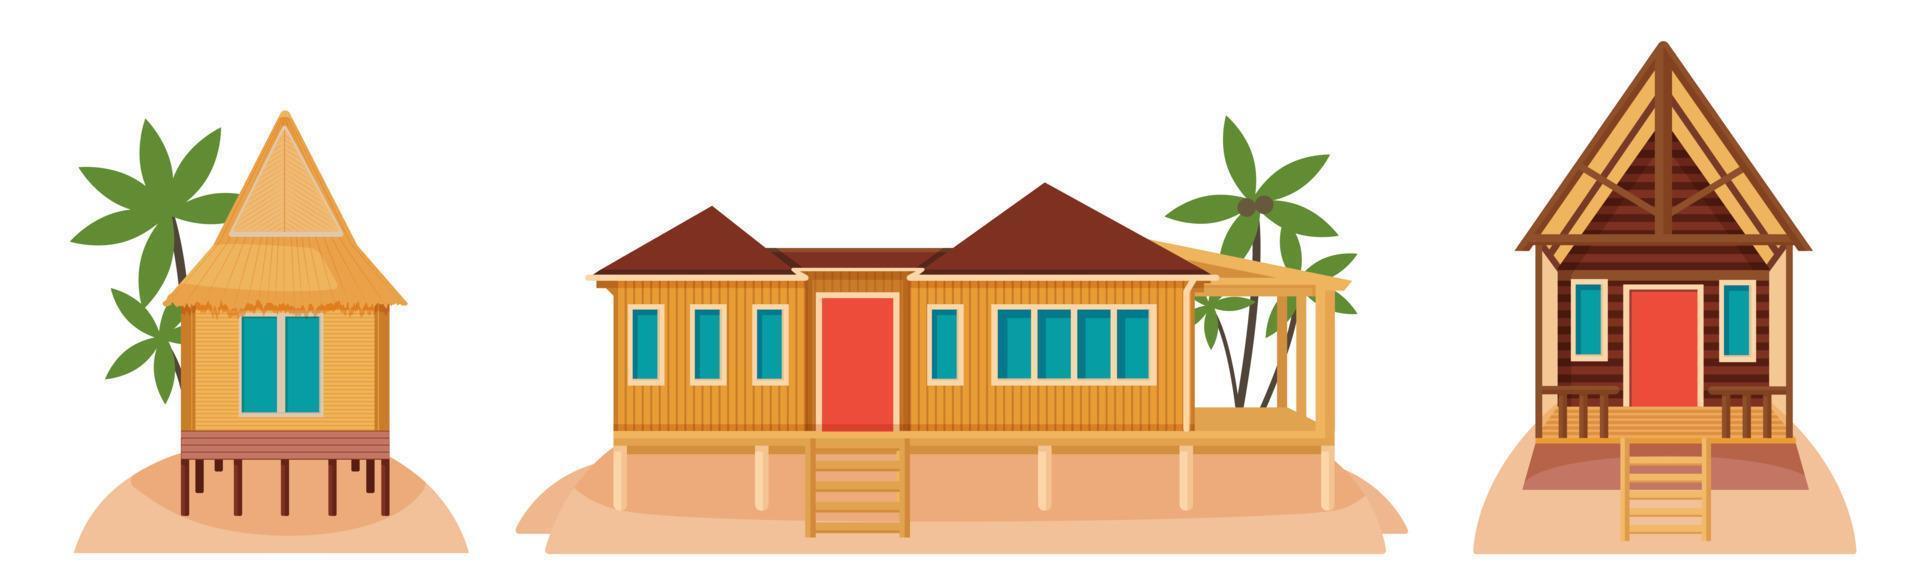 Bungalow houses on tropical islands. Illustration of exotic architecture vector